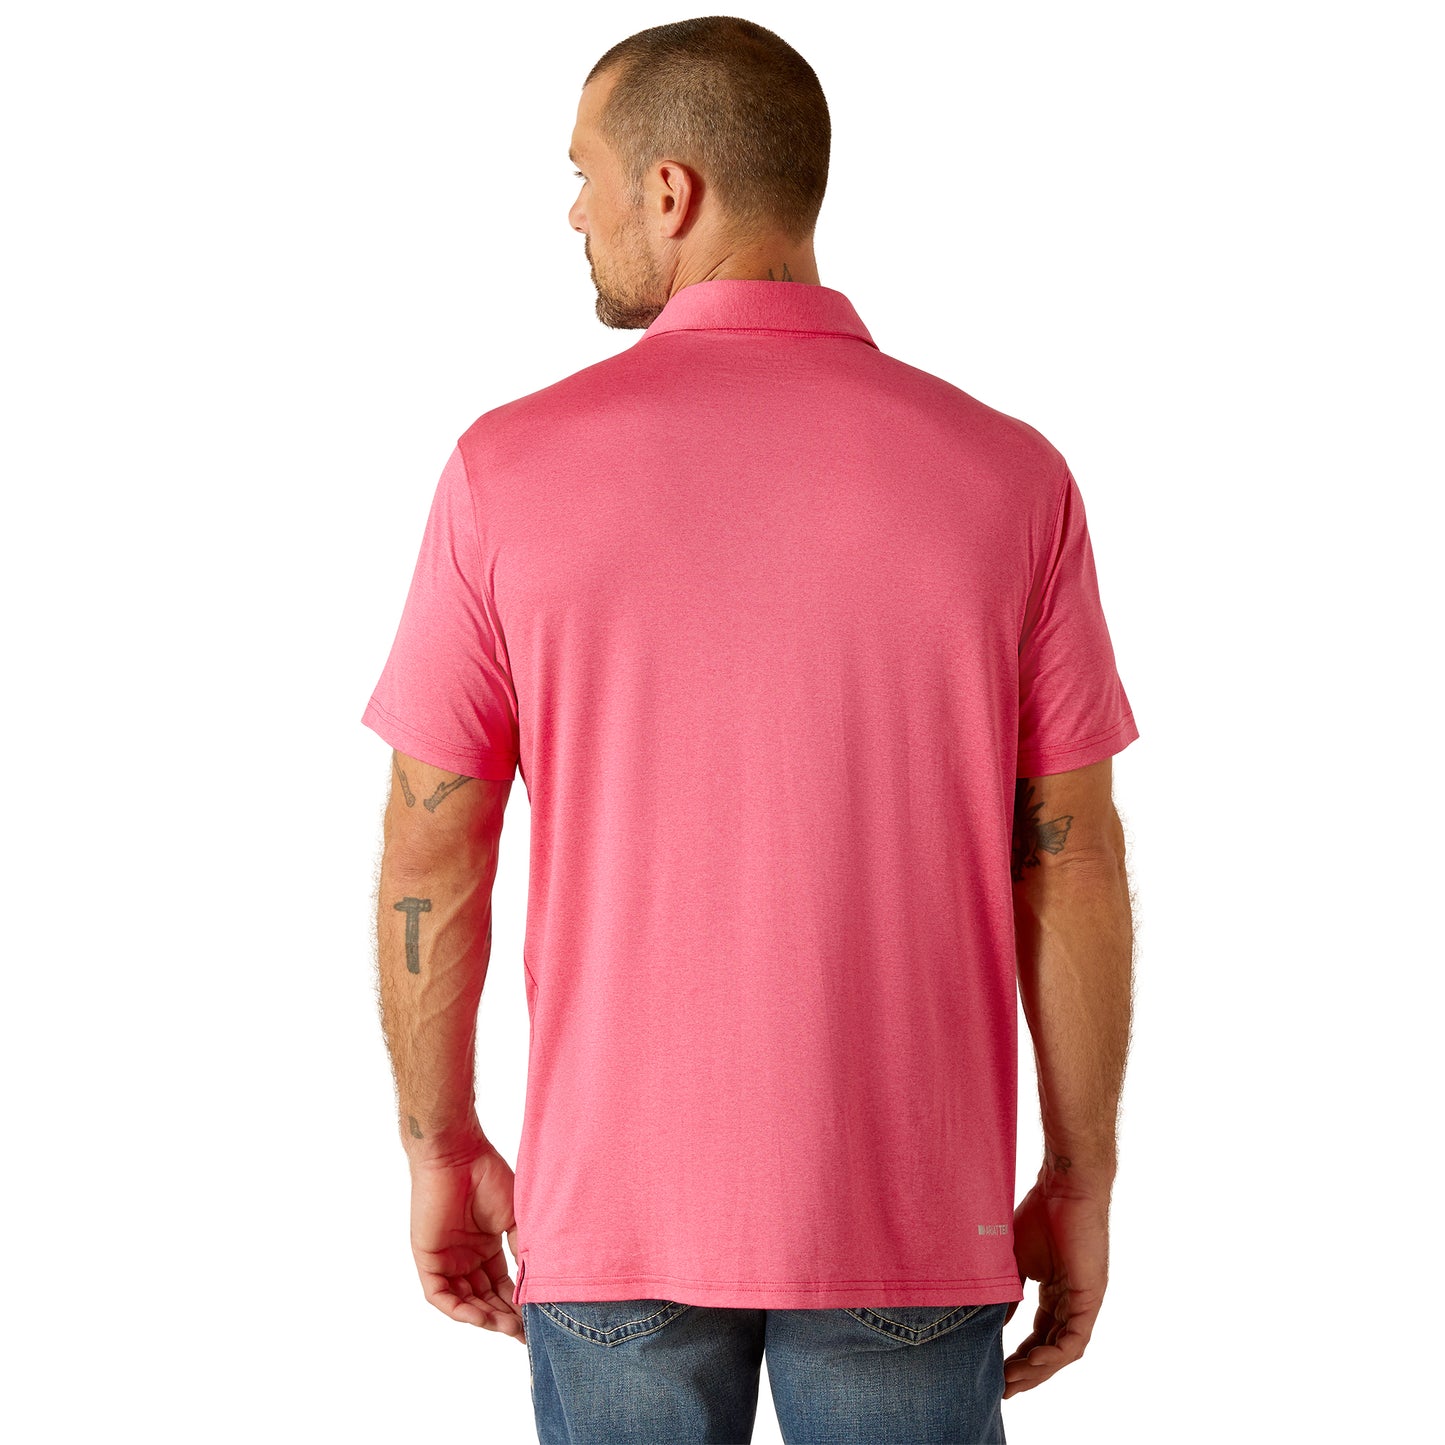 Ariat Men's Charger 2.0 Fitted Pink Pulse Polo Shirt 10051312